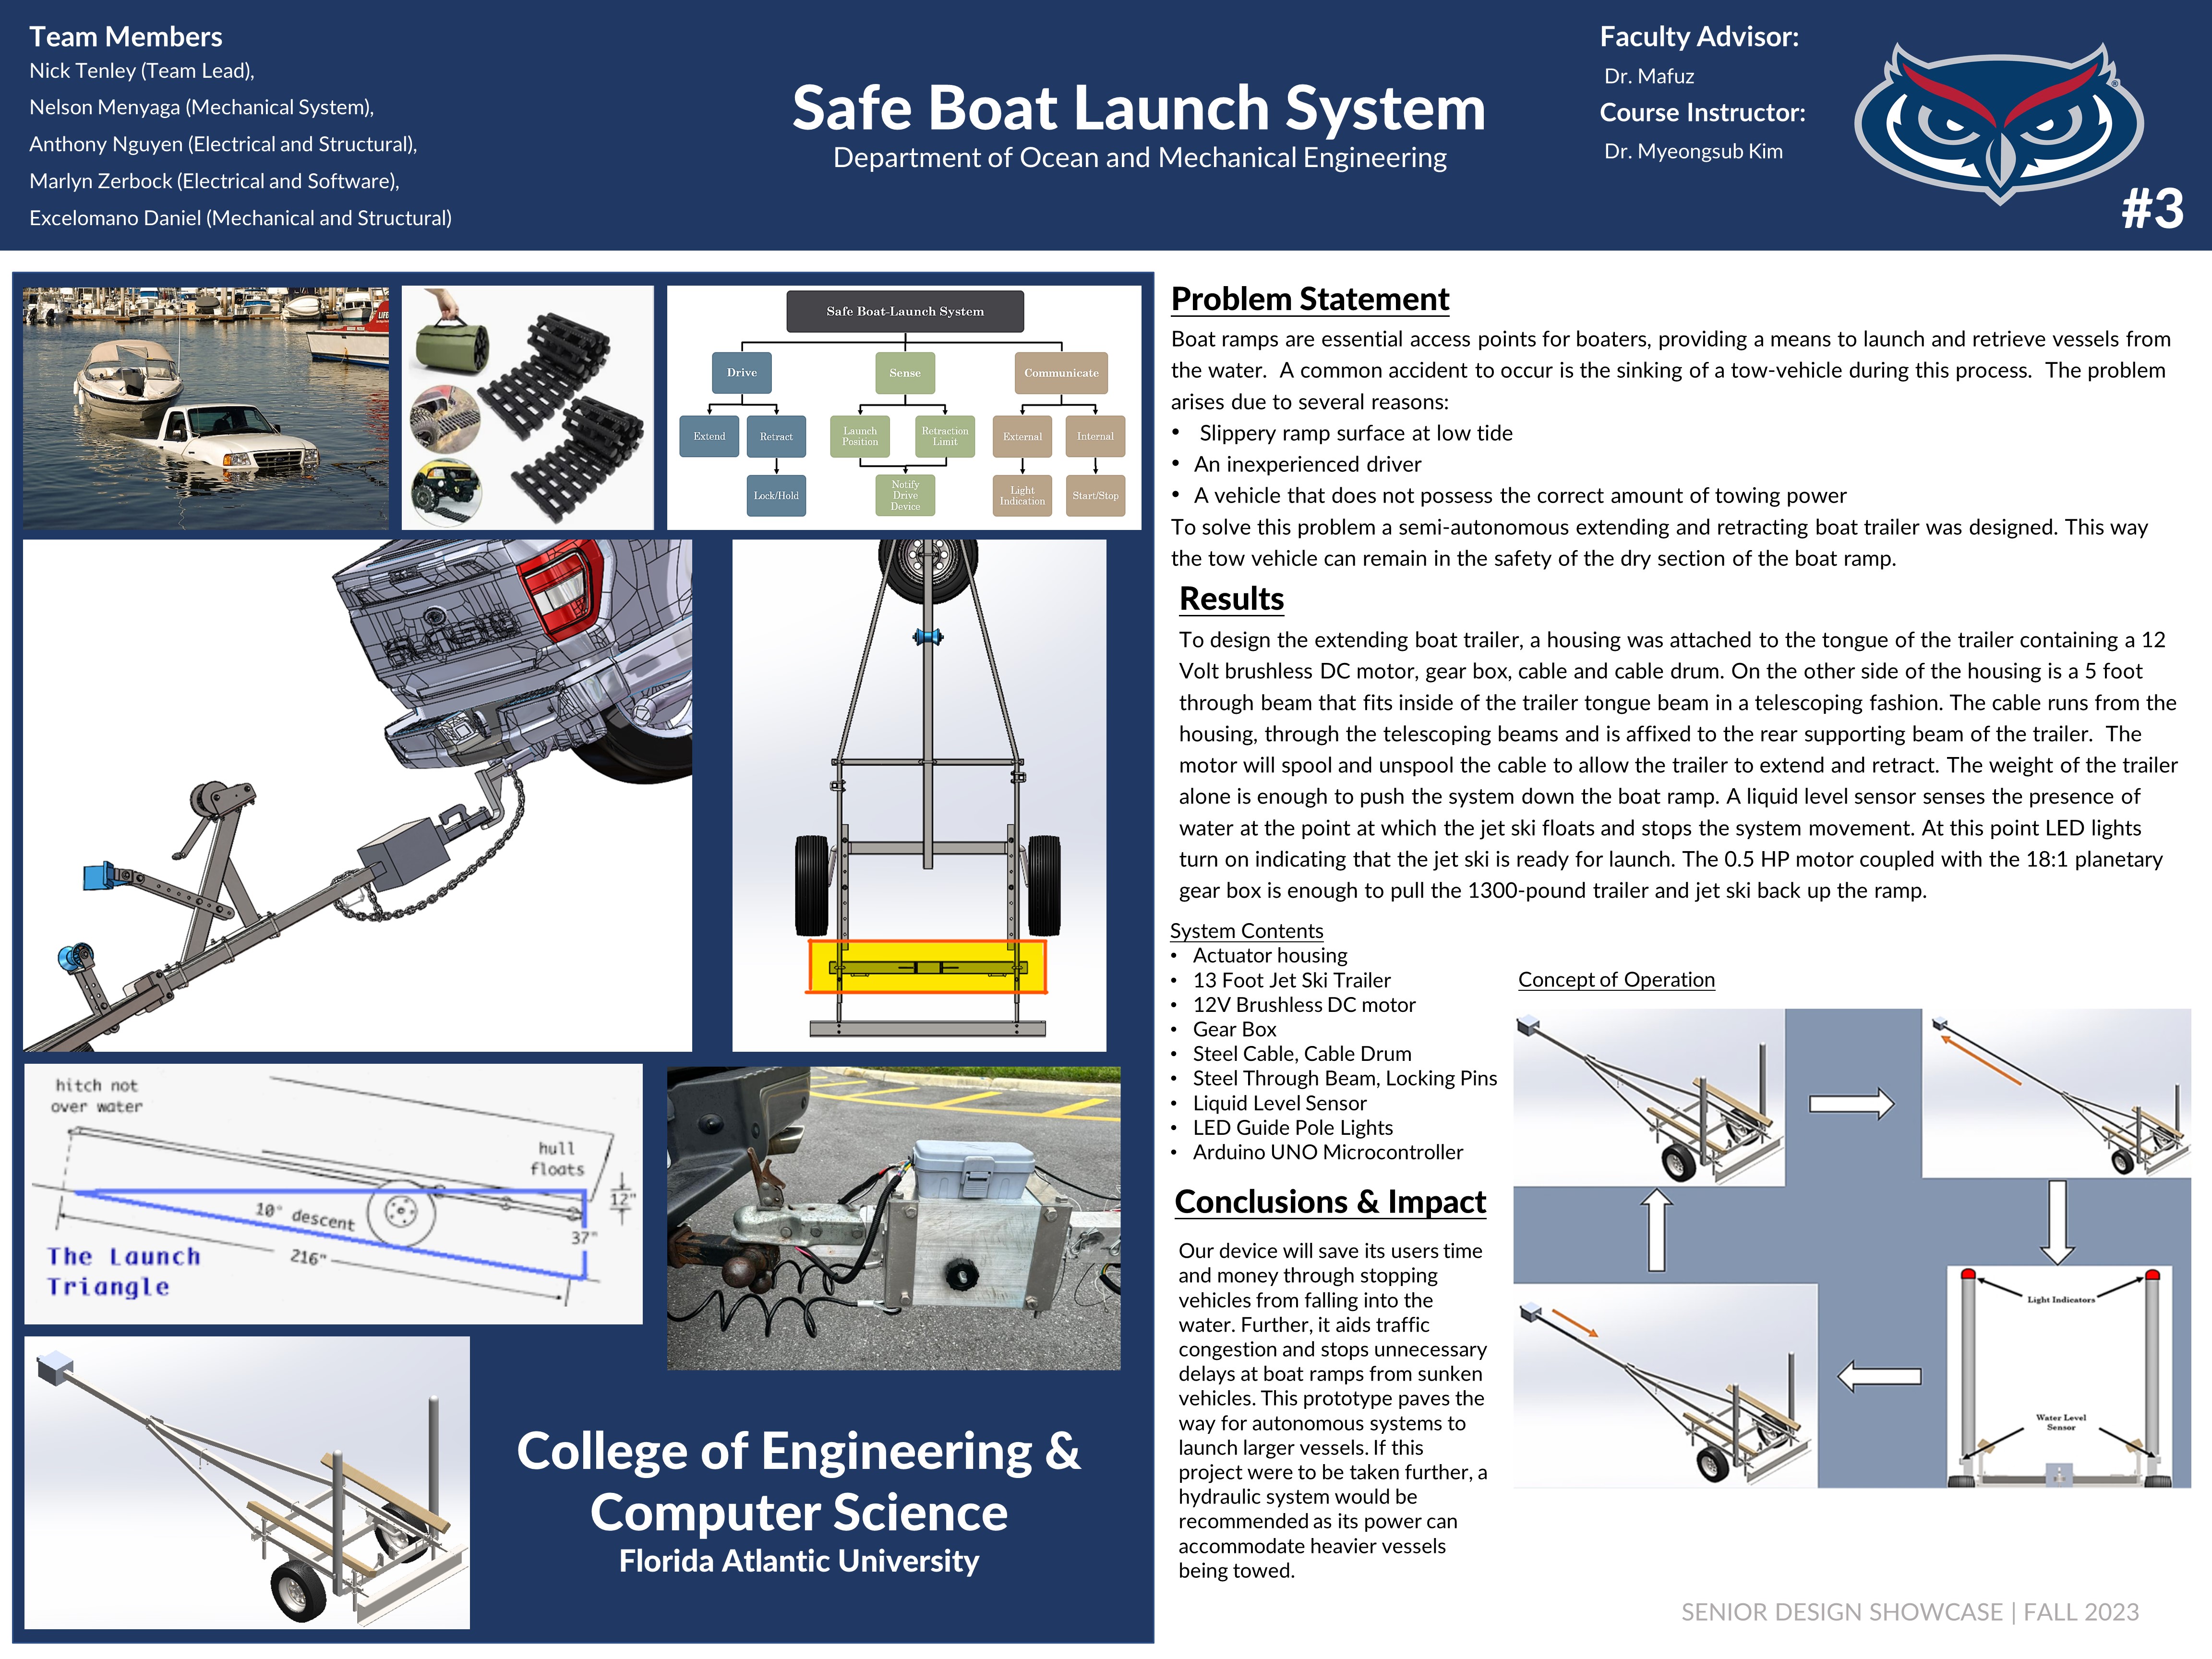 Safe Boat-Launch System